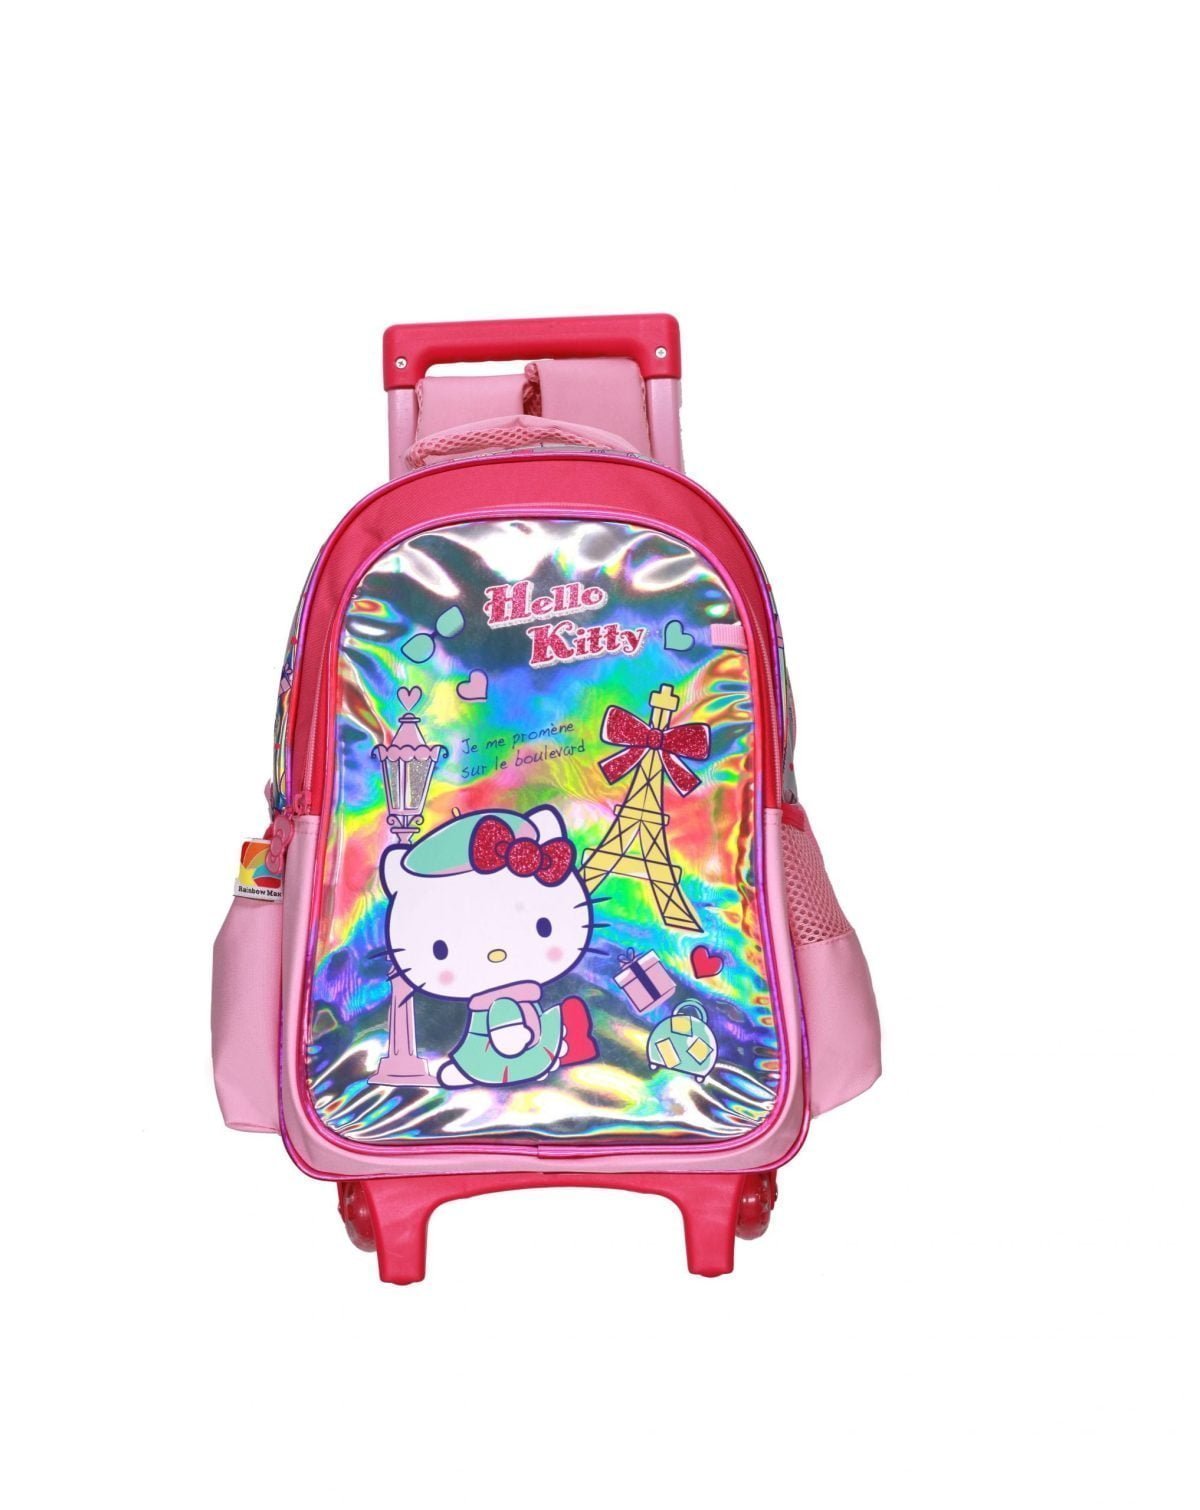 Hk672 3090T 1 Scaled Hello Kitty The Trolley Bag Is A Reliable Companion For Your Journey. The Trolley Features Main Zip Compartment To Keep Your Child'S Belonging Or School Items. The Trolley Has Comfortable Handle On The Top. The Fine Quality Material And Printing Makes It Durable And Stylish Option. It Is Easy To Zip And Unzip With Smooth Zippers And Pullers. The Wheels On The Bottom Make It Easy To Drag. Wipe With A Clean And Dry Cloth. Hello Kitty Trolley Bag Hello Kitty Trolley Bag 15&Amp;Quot; - 2 Main Compartments And 2 Side Pockets (Hk672)